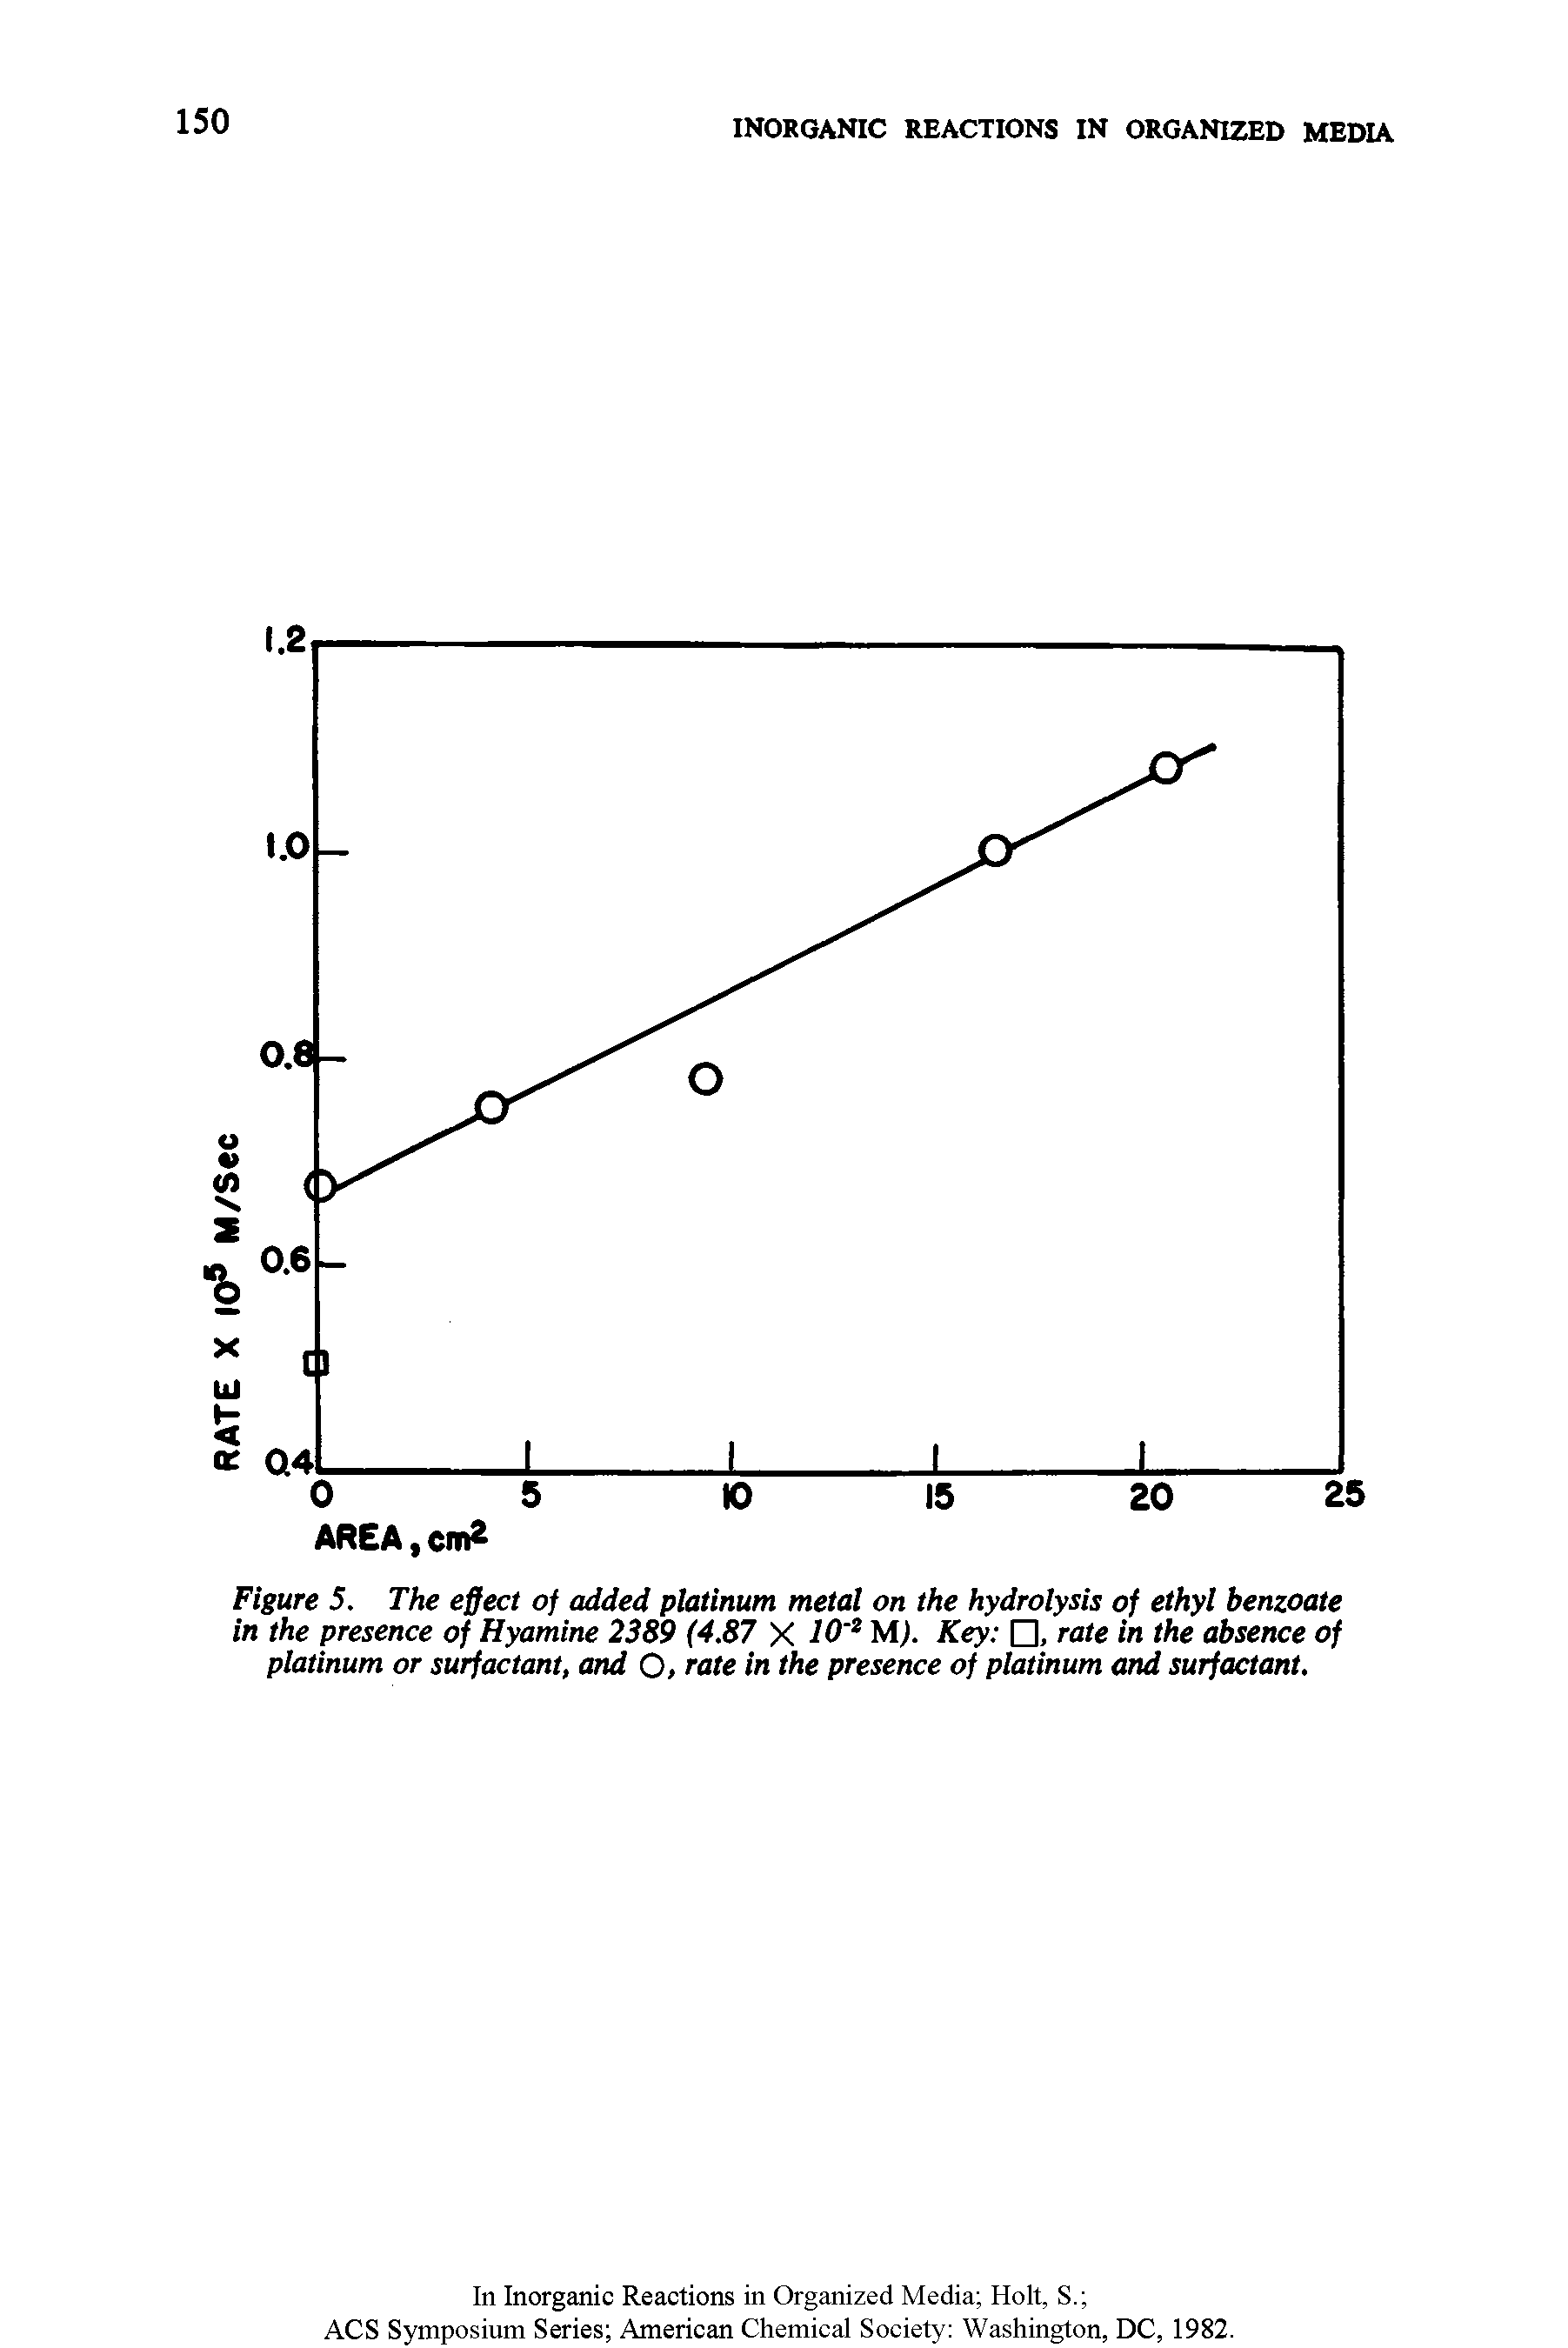 Figure 5. The effect of added platinum metal on the hydrolysis of ethyl benzoate in the presence of Hyamine 2389 (4.87 X 10 M. Key , rate in the absence of platinum or surfactant, and O, rate in the presence of platinum and surfactant.